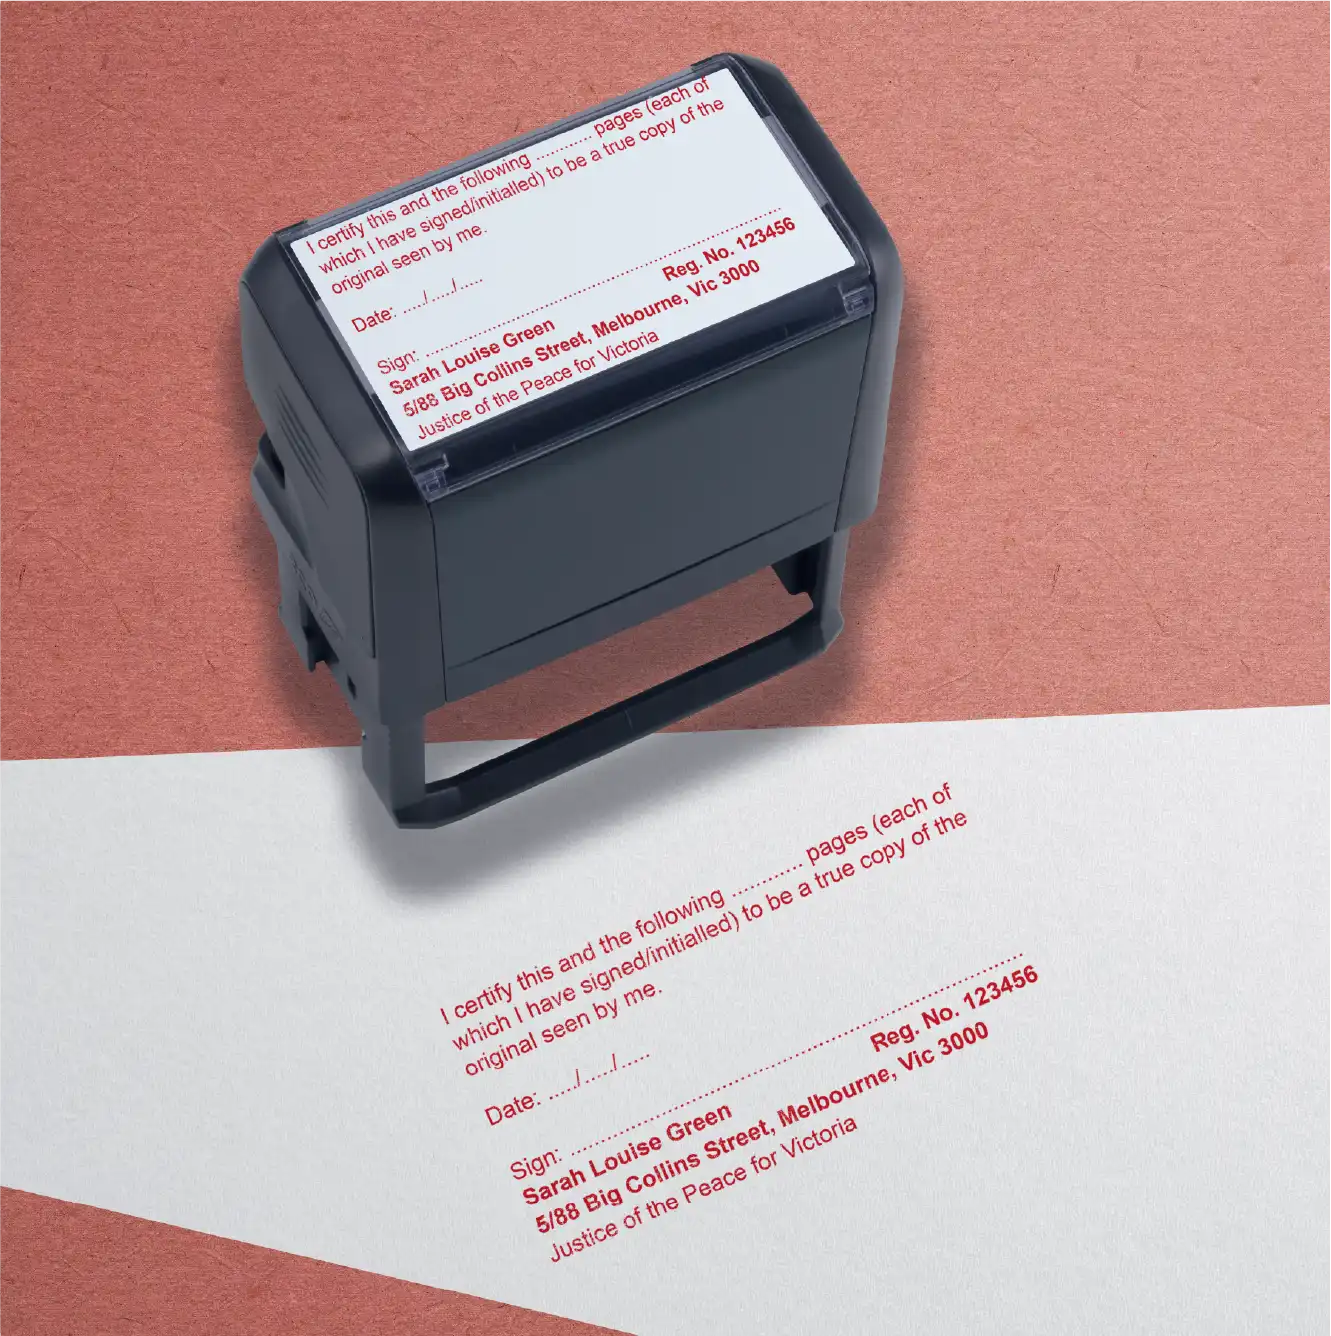 Large JP rubber stamp for certifying Multi page documents Victoria